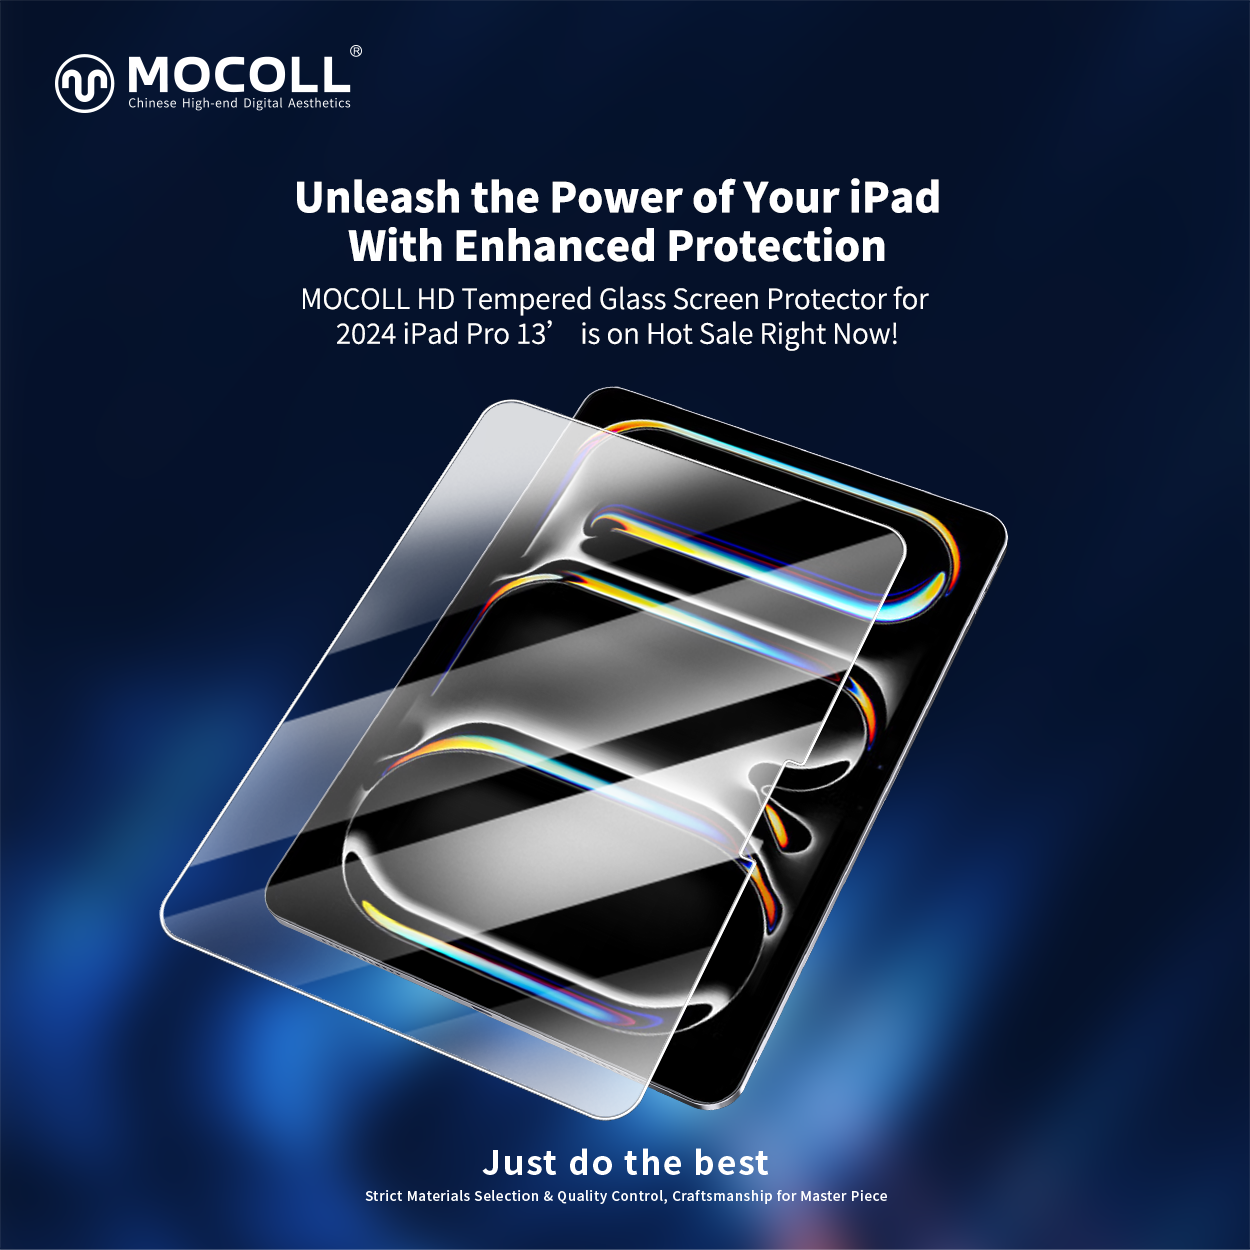 HD tempered glass screen protector for iPad Pro 2024